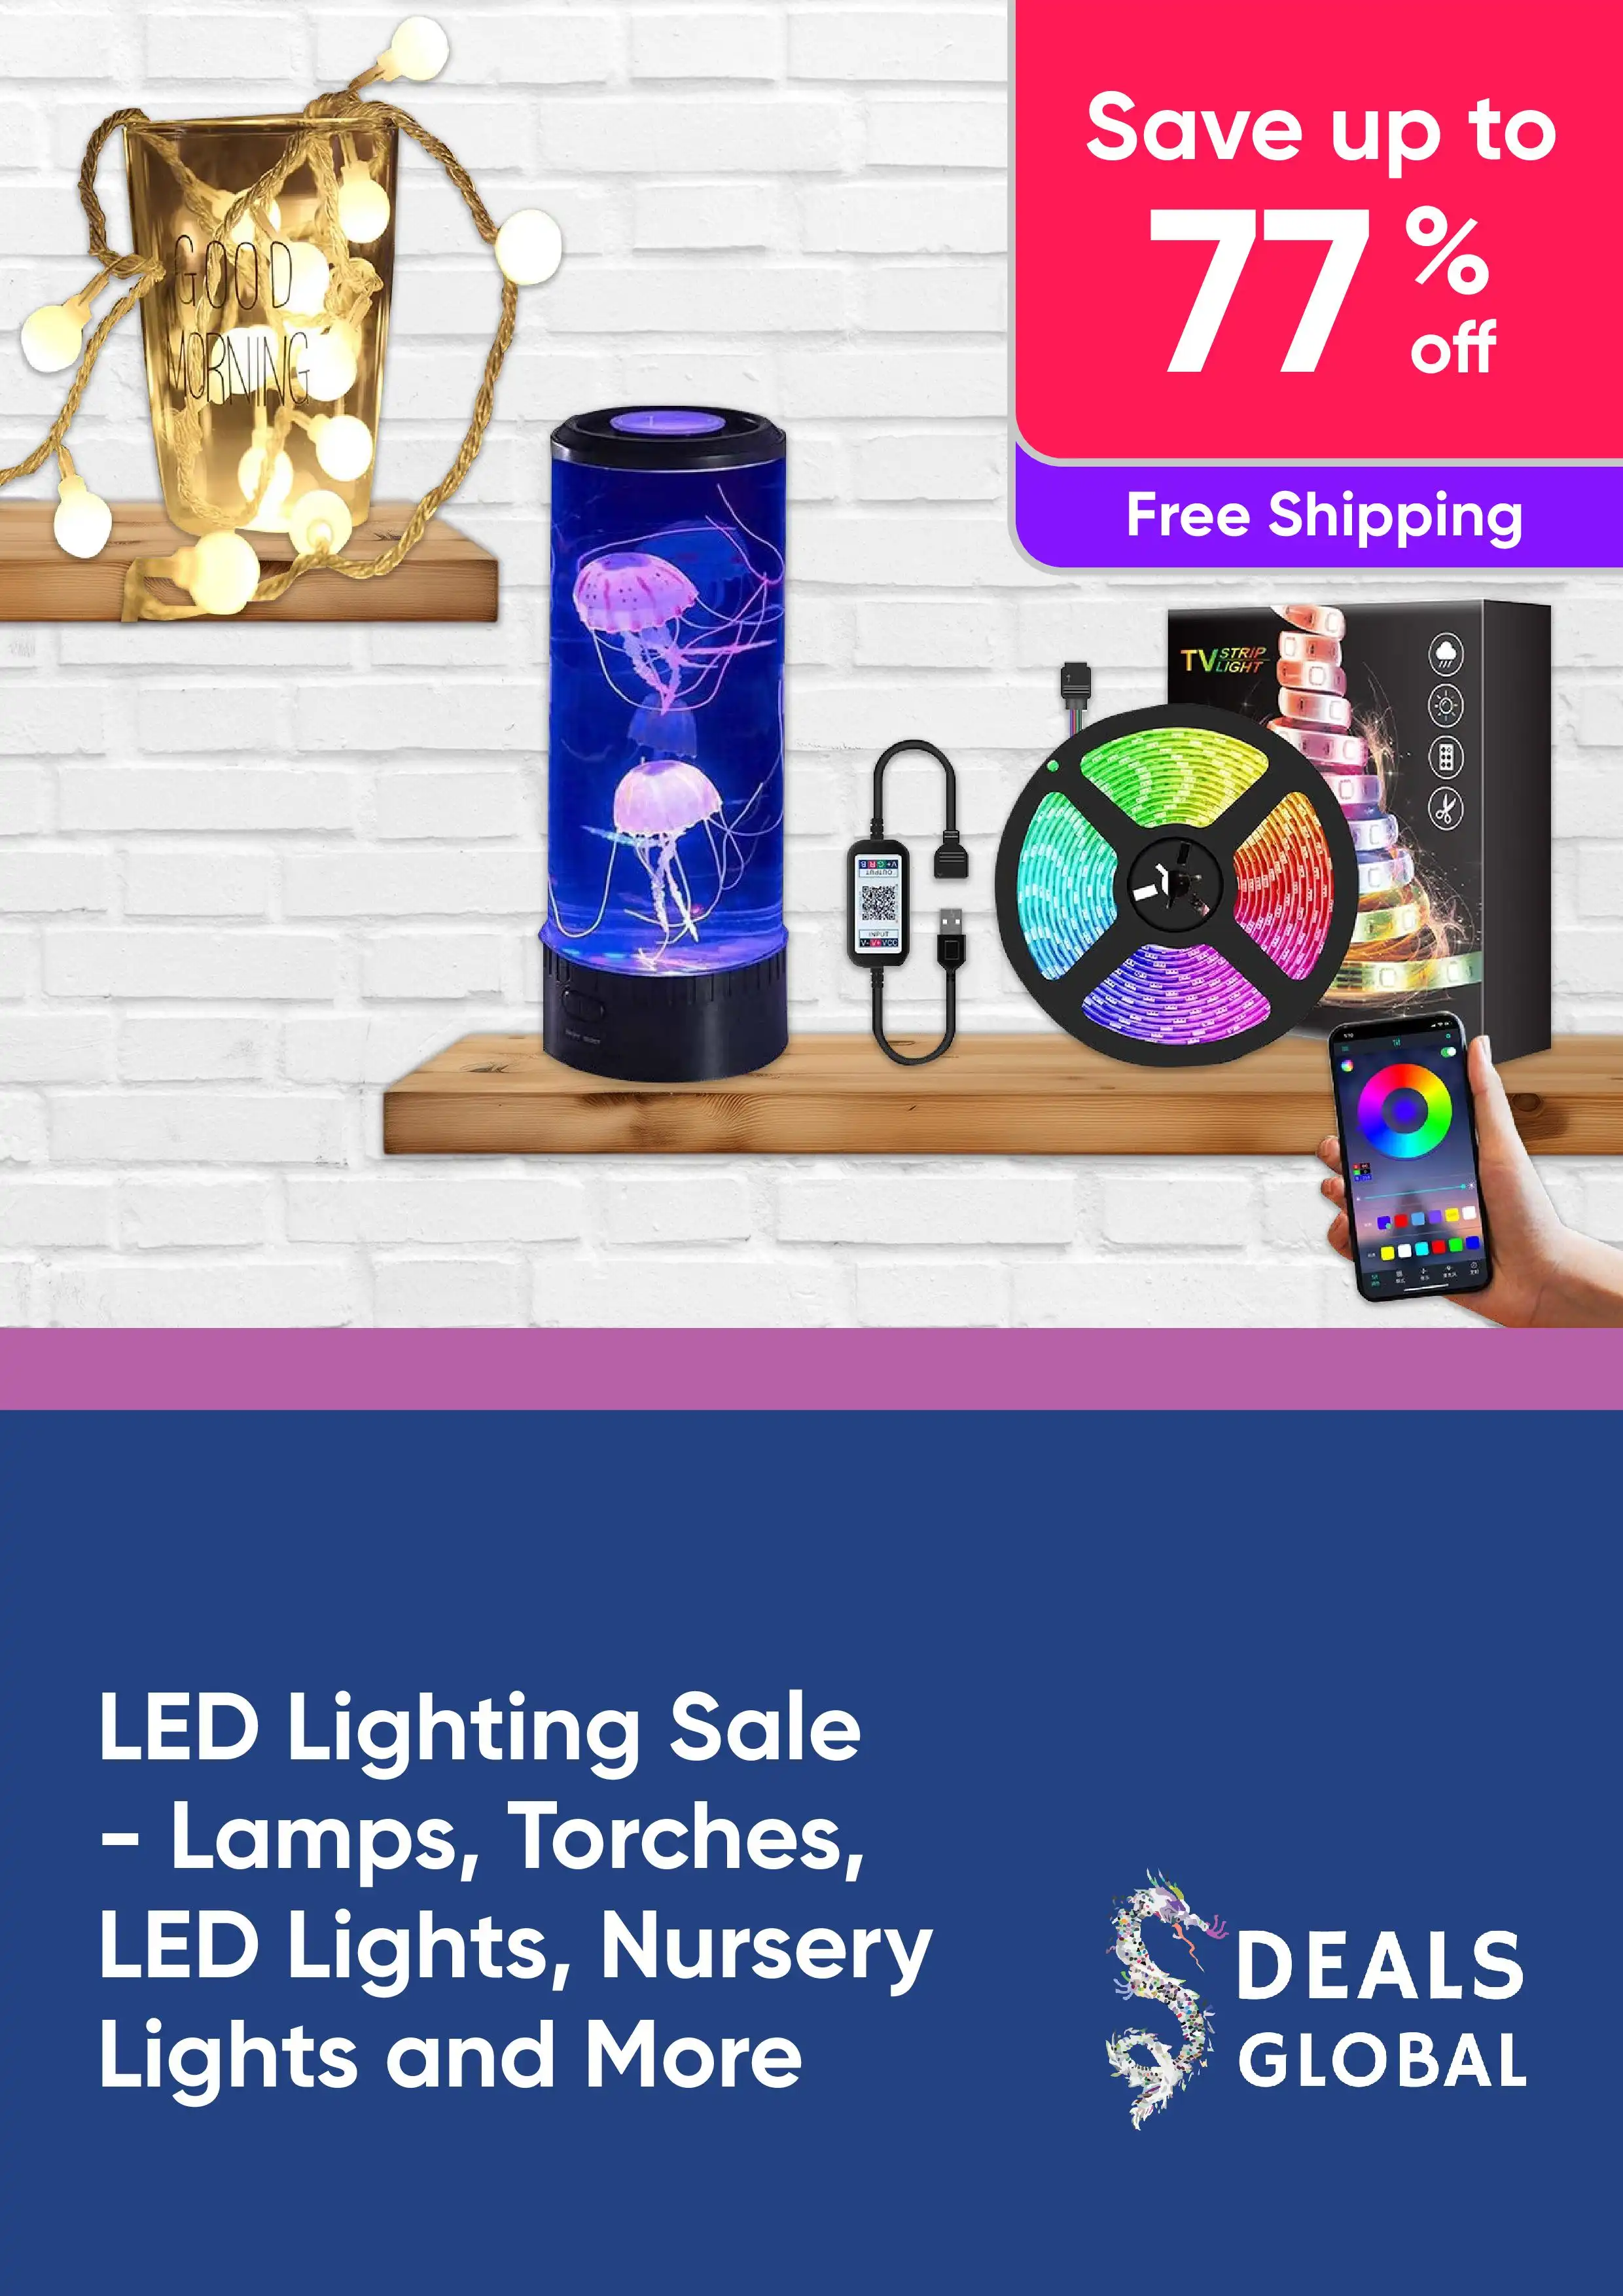 LED Lighting Sale - Shop and Save up to 77% Off Lamps, Torches, LED Lights, Nursery Lights and More